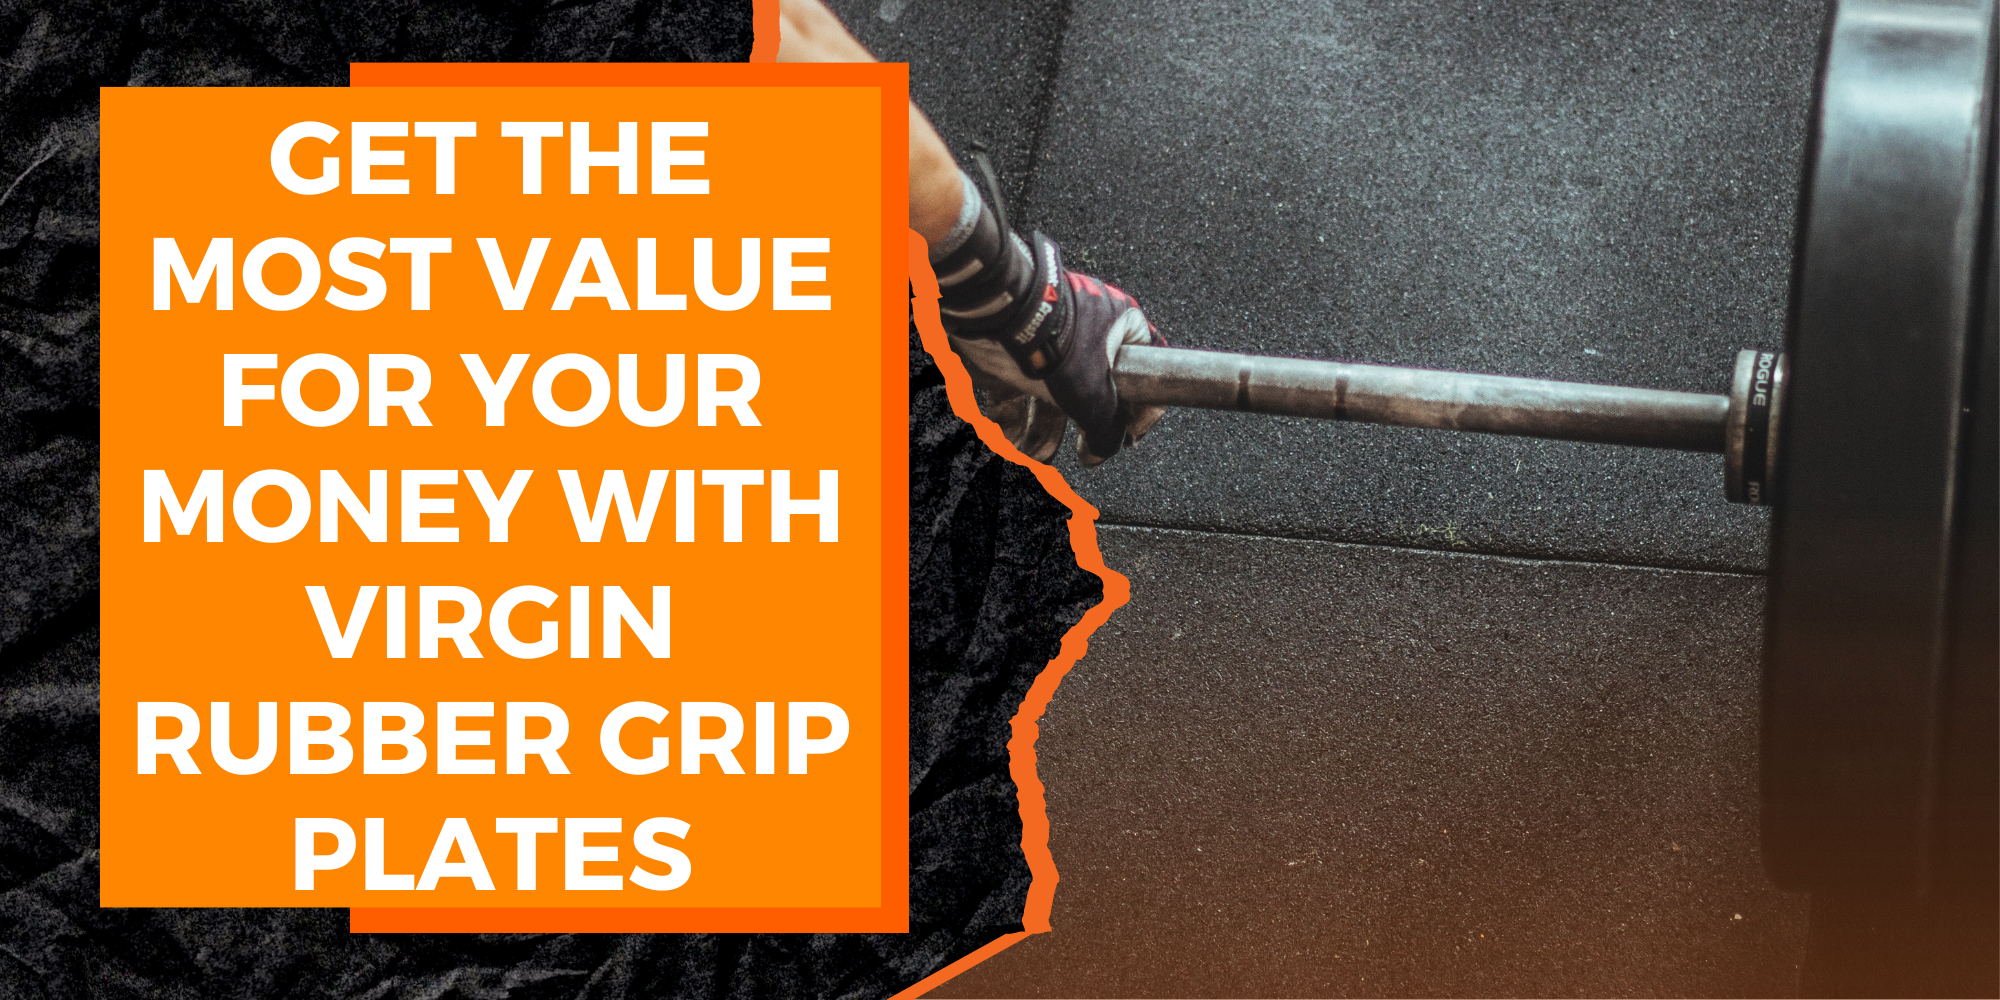 Get the Most Value for Your Money with Virgin Rubber Grip Plates